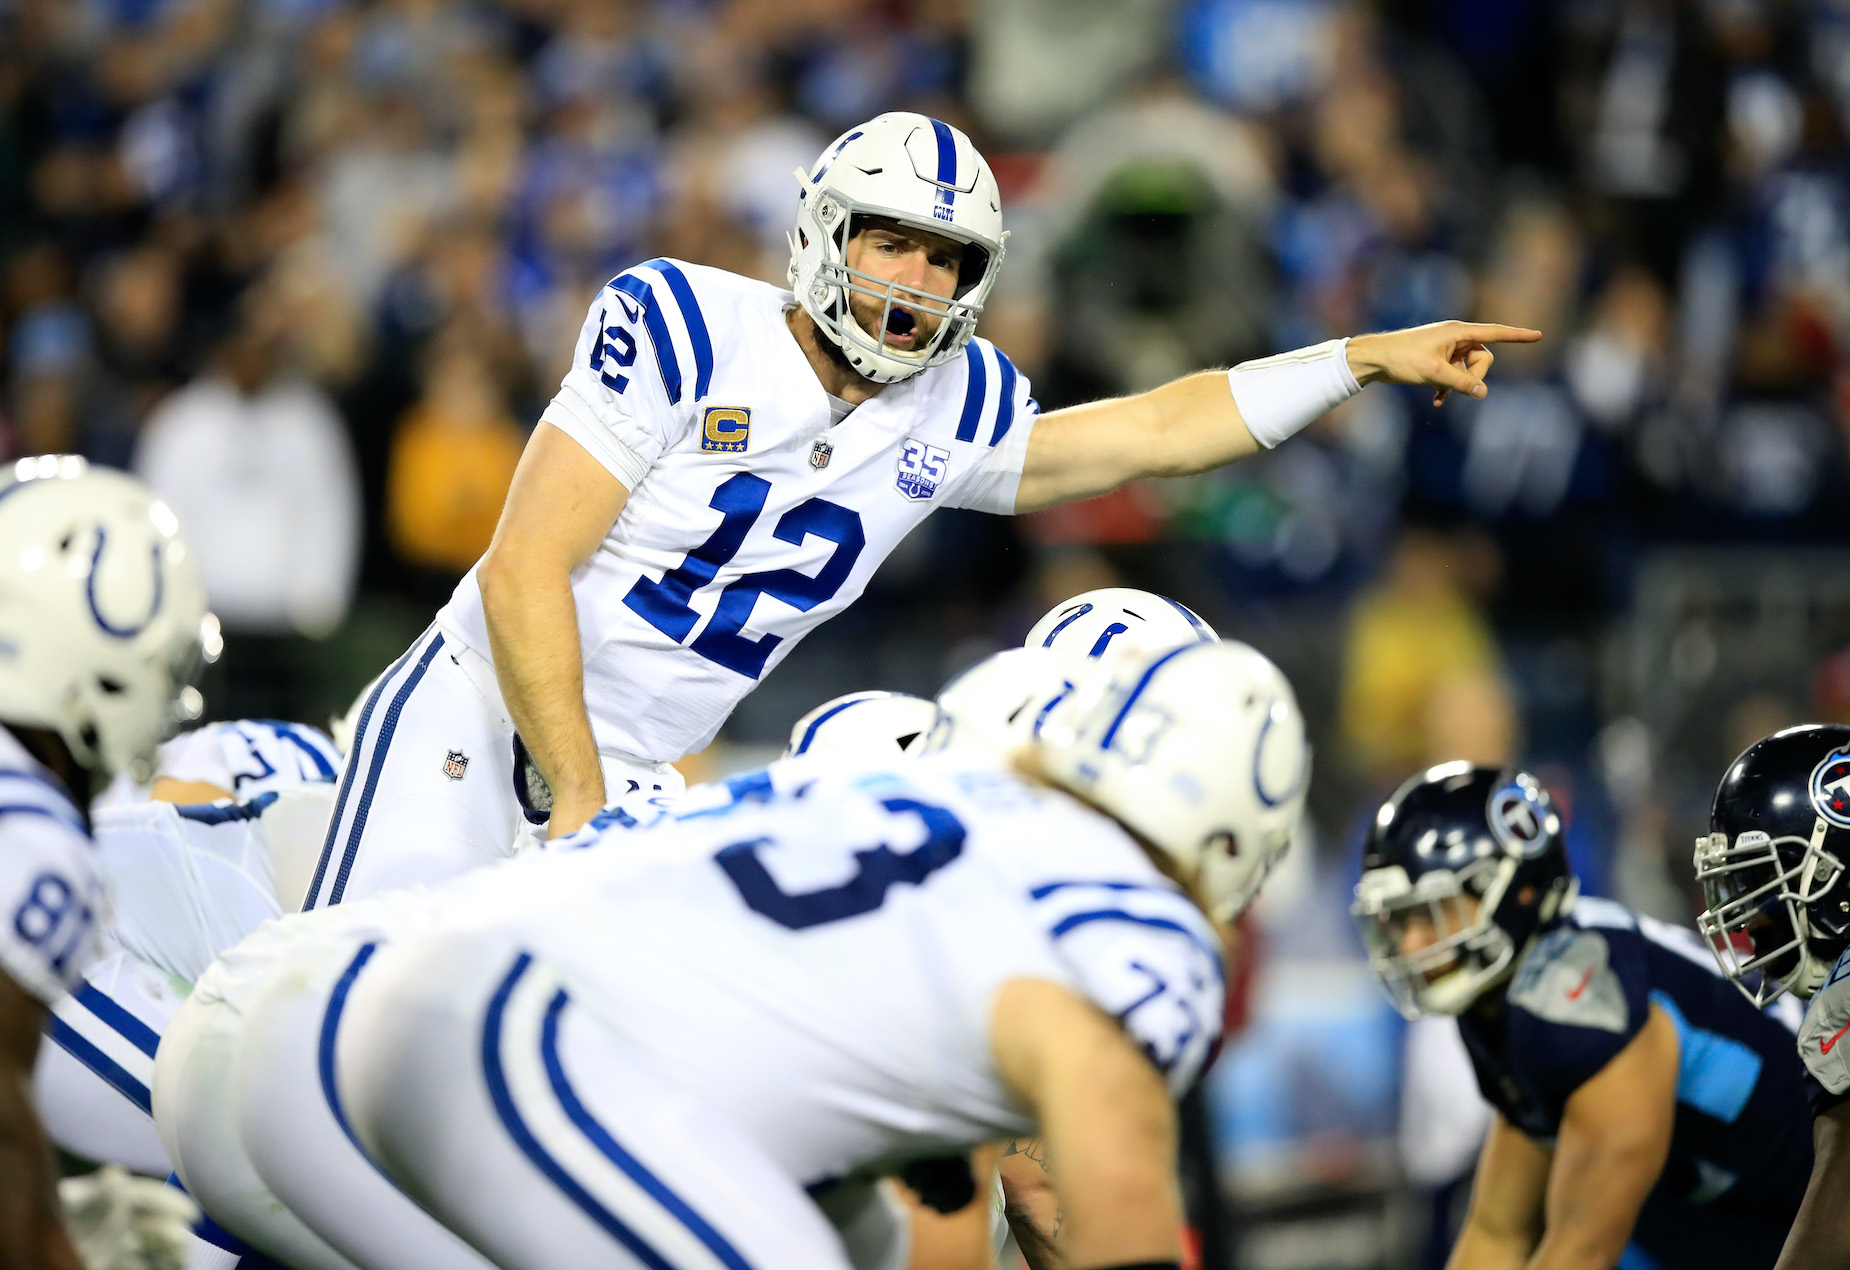 While the Indianapolis Colts would love to see Andrew Luck make a comeback, the team won't be holding their breath.